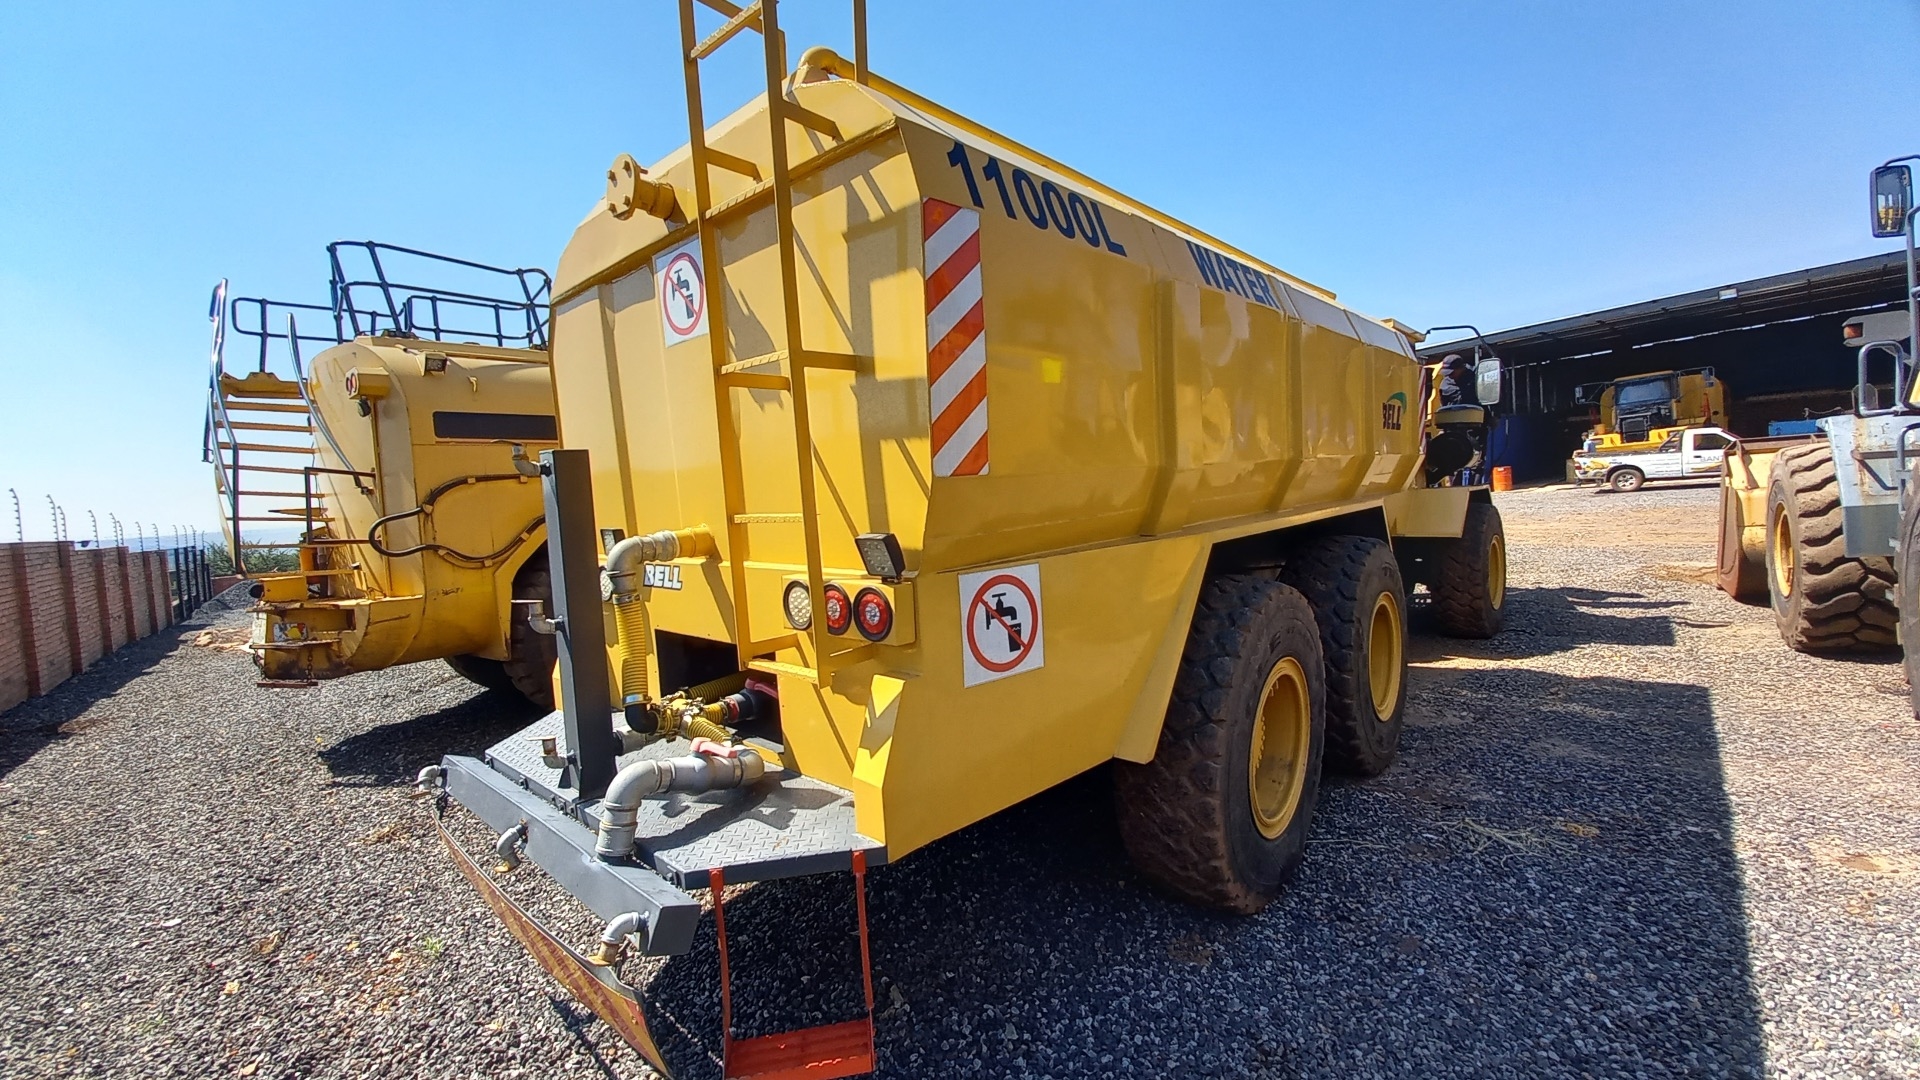 Bell Water tankers B25B 11 000L Bowser 1996 for sale by EARTHCOMP | Truck & Trailer Marketplaces